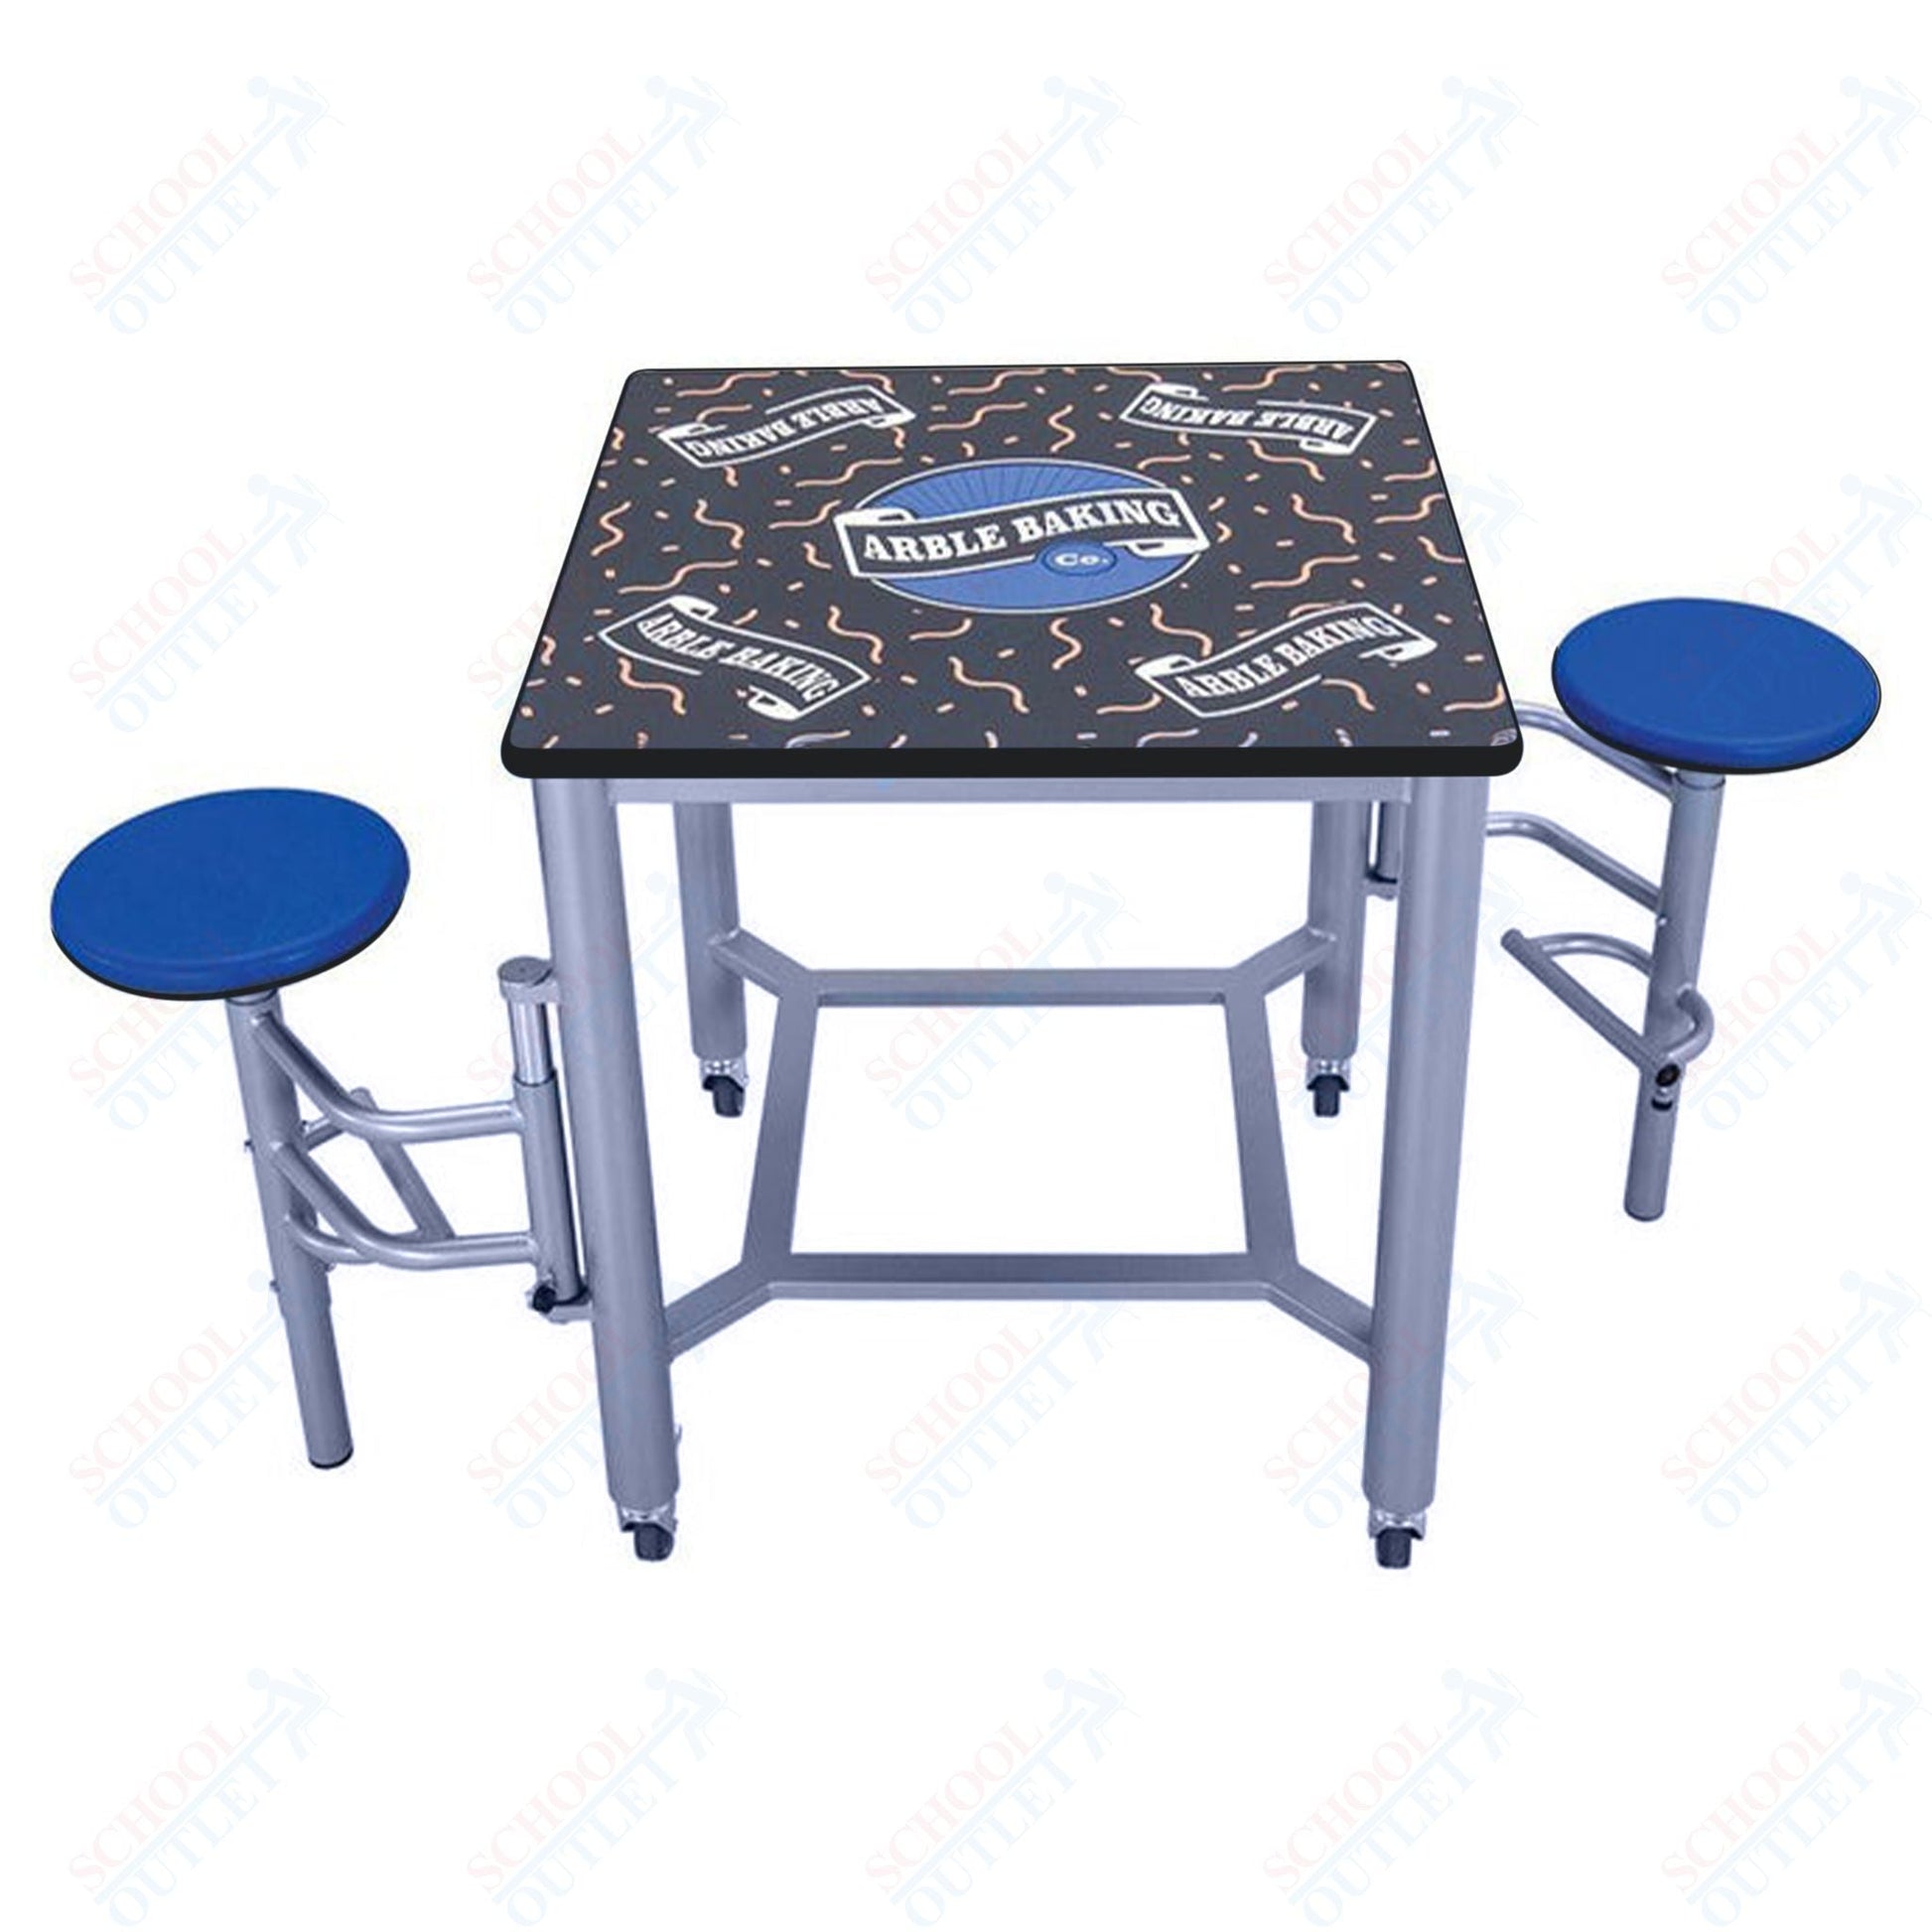 AmTab Mobile Stool Table - Double Collaboration High Table - 36"W x 36"L x 29"H - 2 Stools (AMT - MDST3636 - 29) - SchoolOutlet